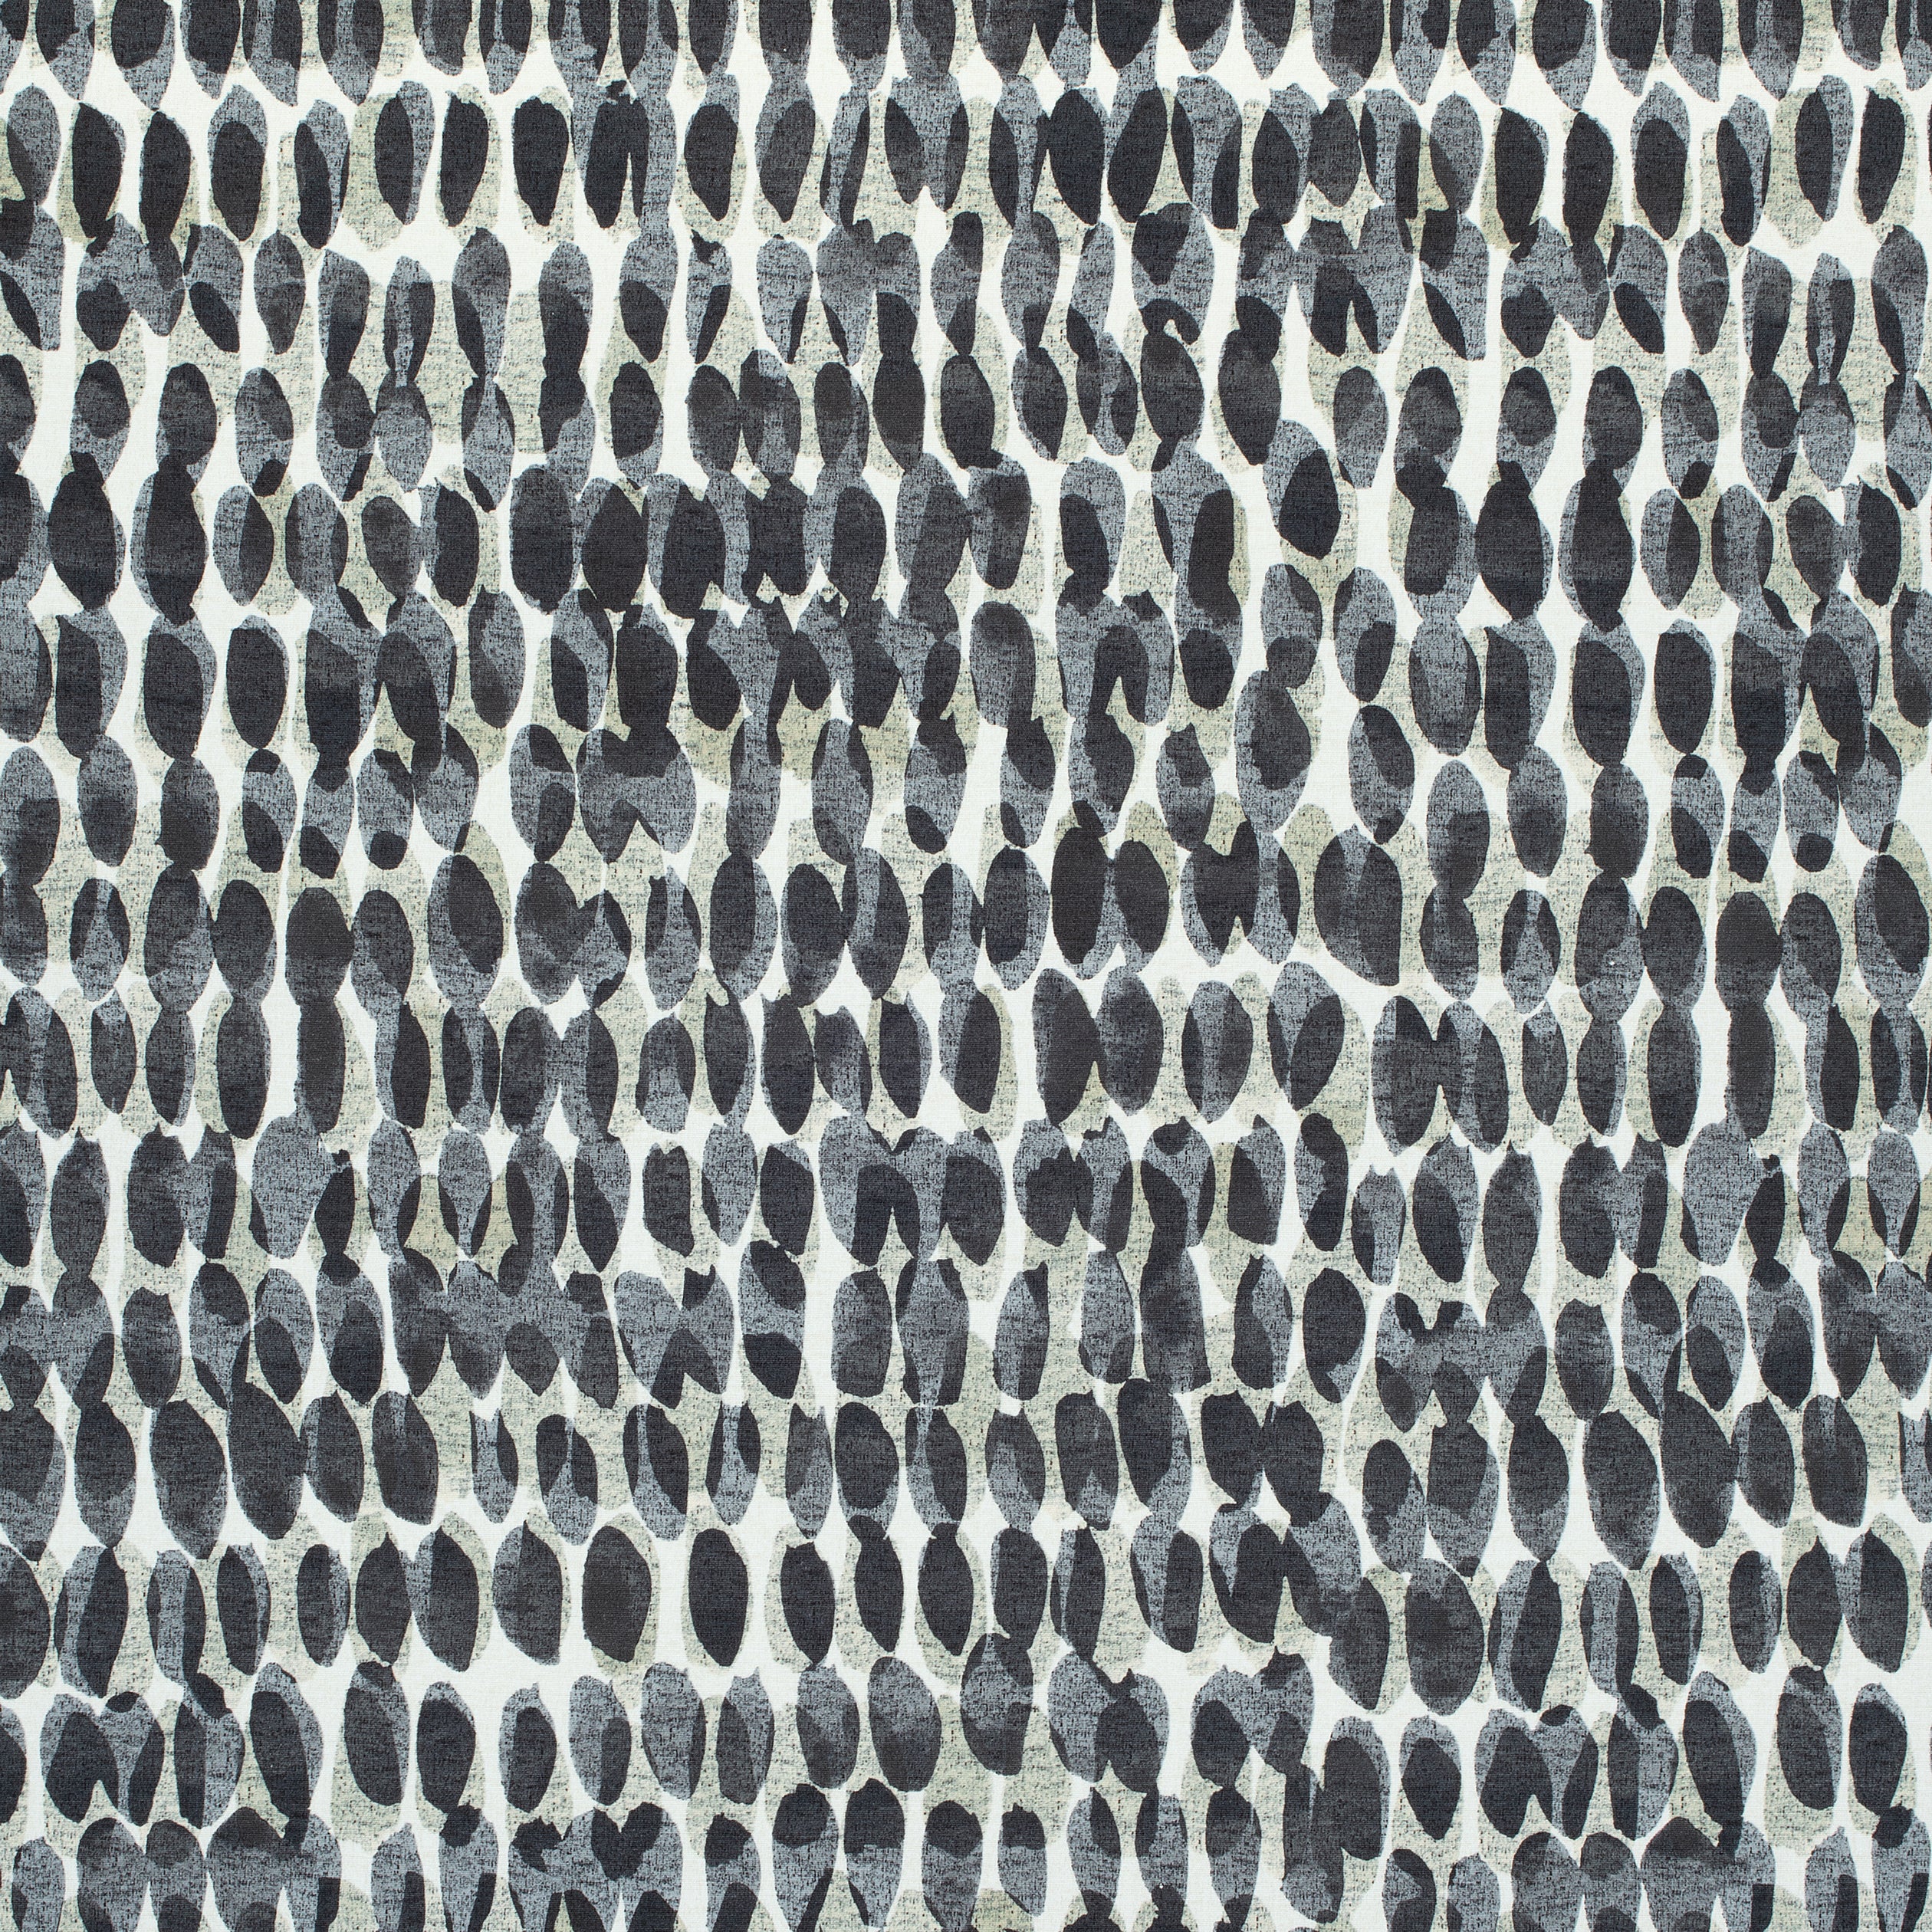 Rain Water fabric in black color - pattern number F910097 - by Thibaut in the Tropics collection